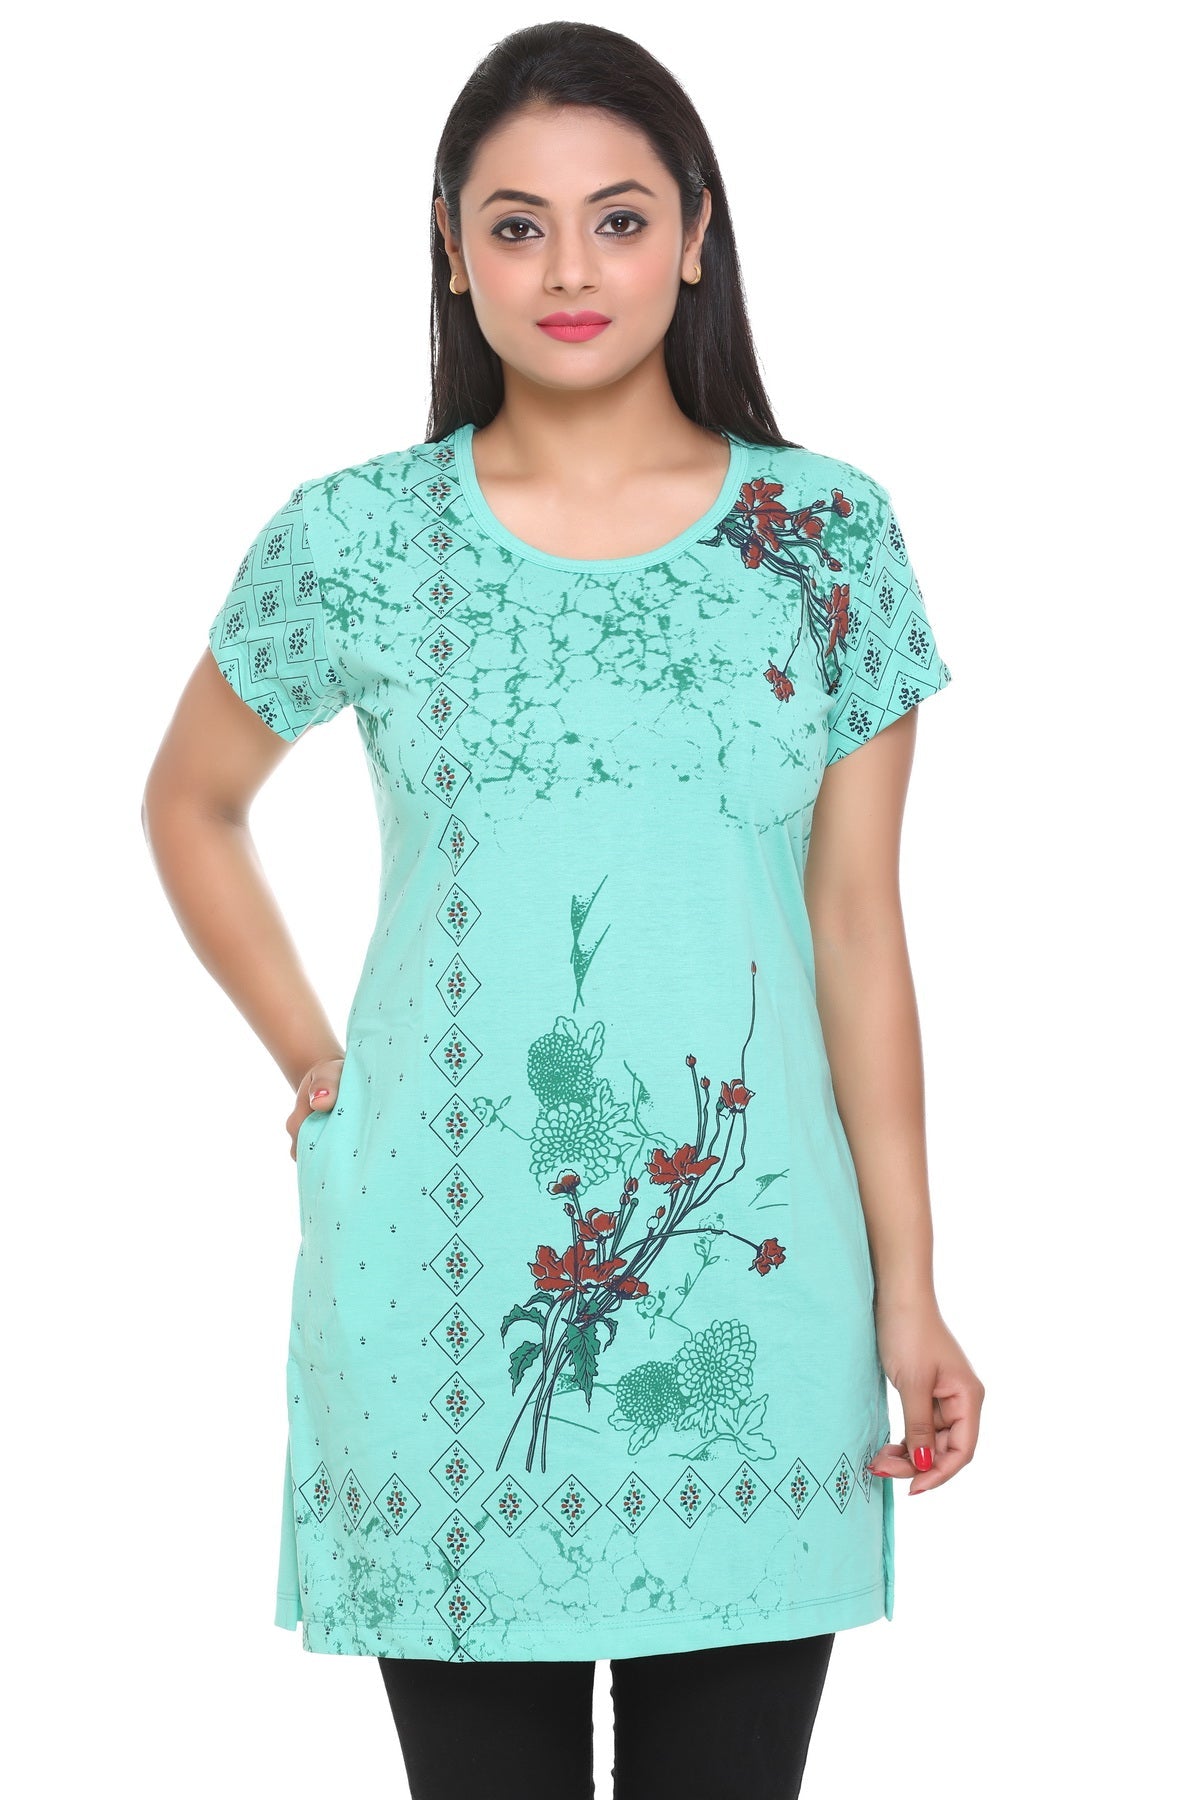 Cotton Printed Long t-Shirts For Women in Half Sleeve -Multicolor  At Best Prices